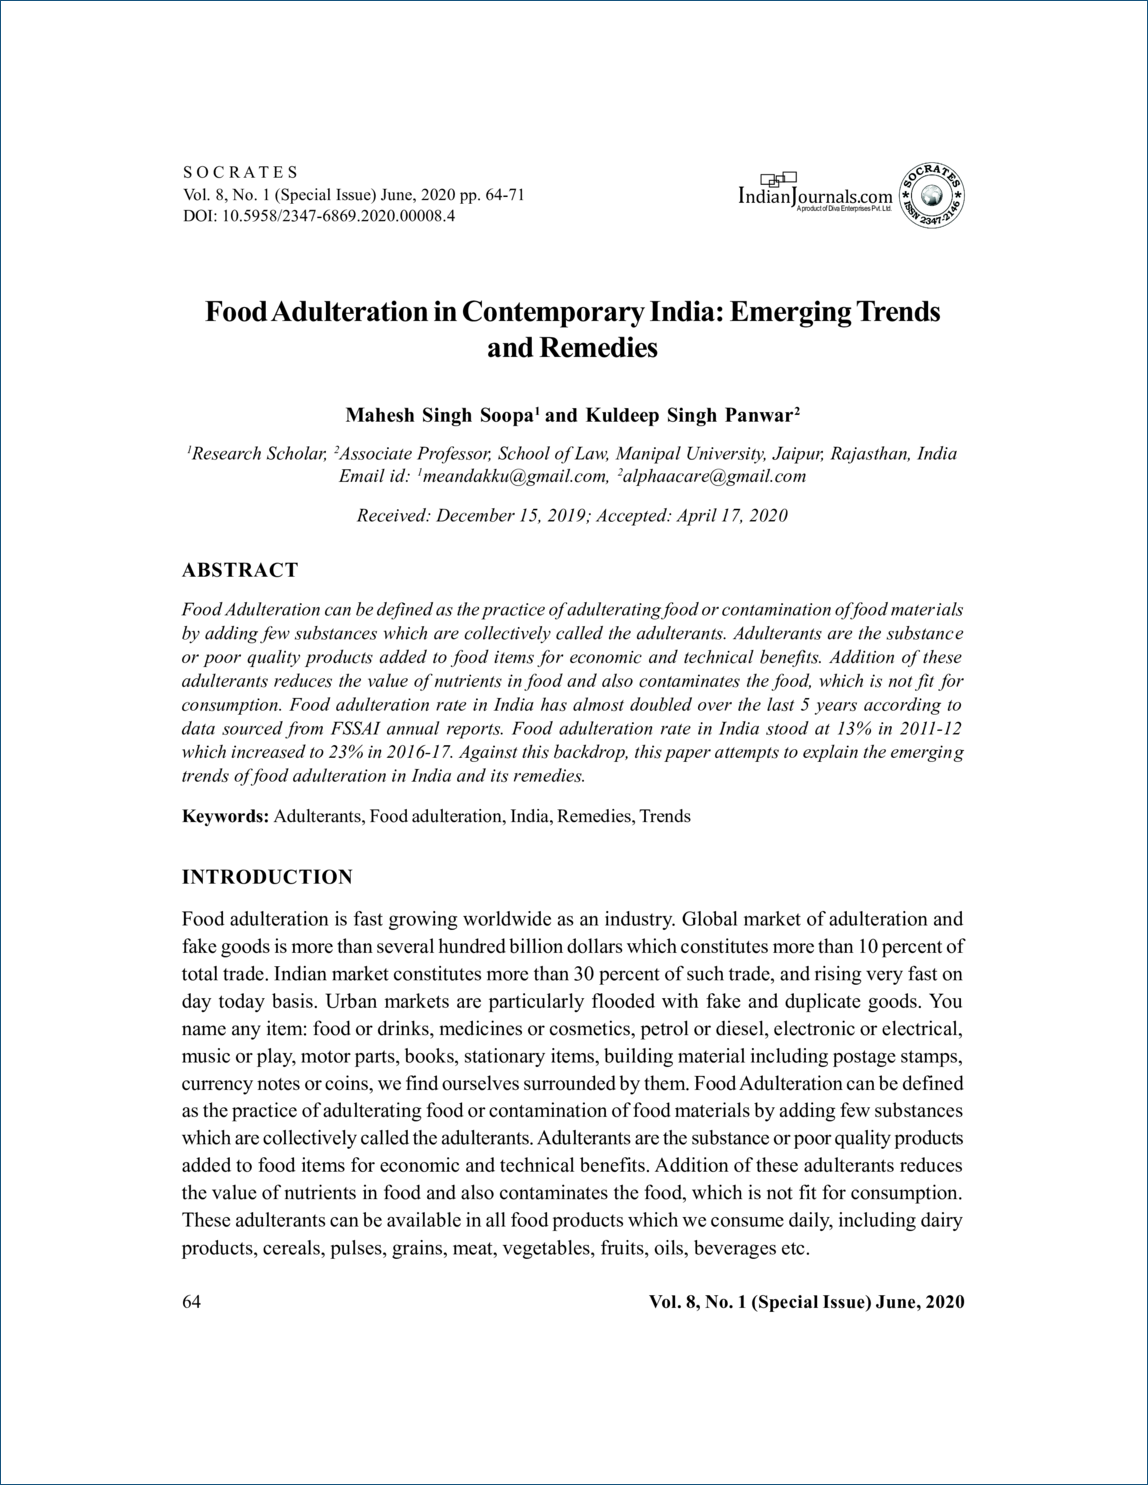  Food Adulteration in Contemporary India 